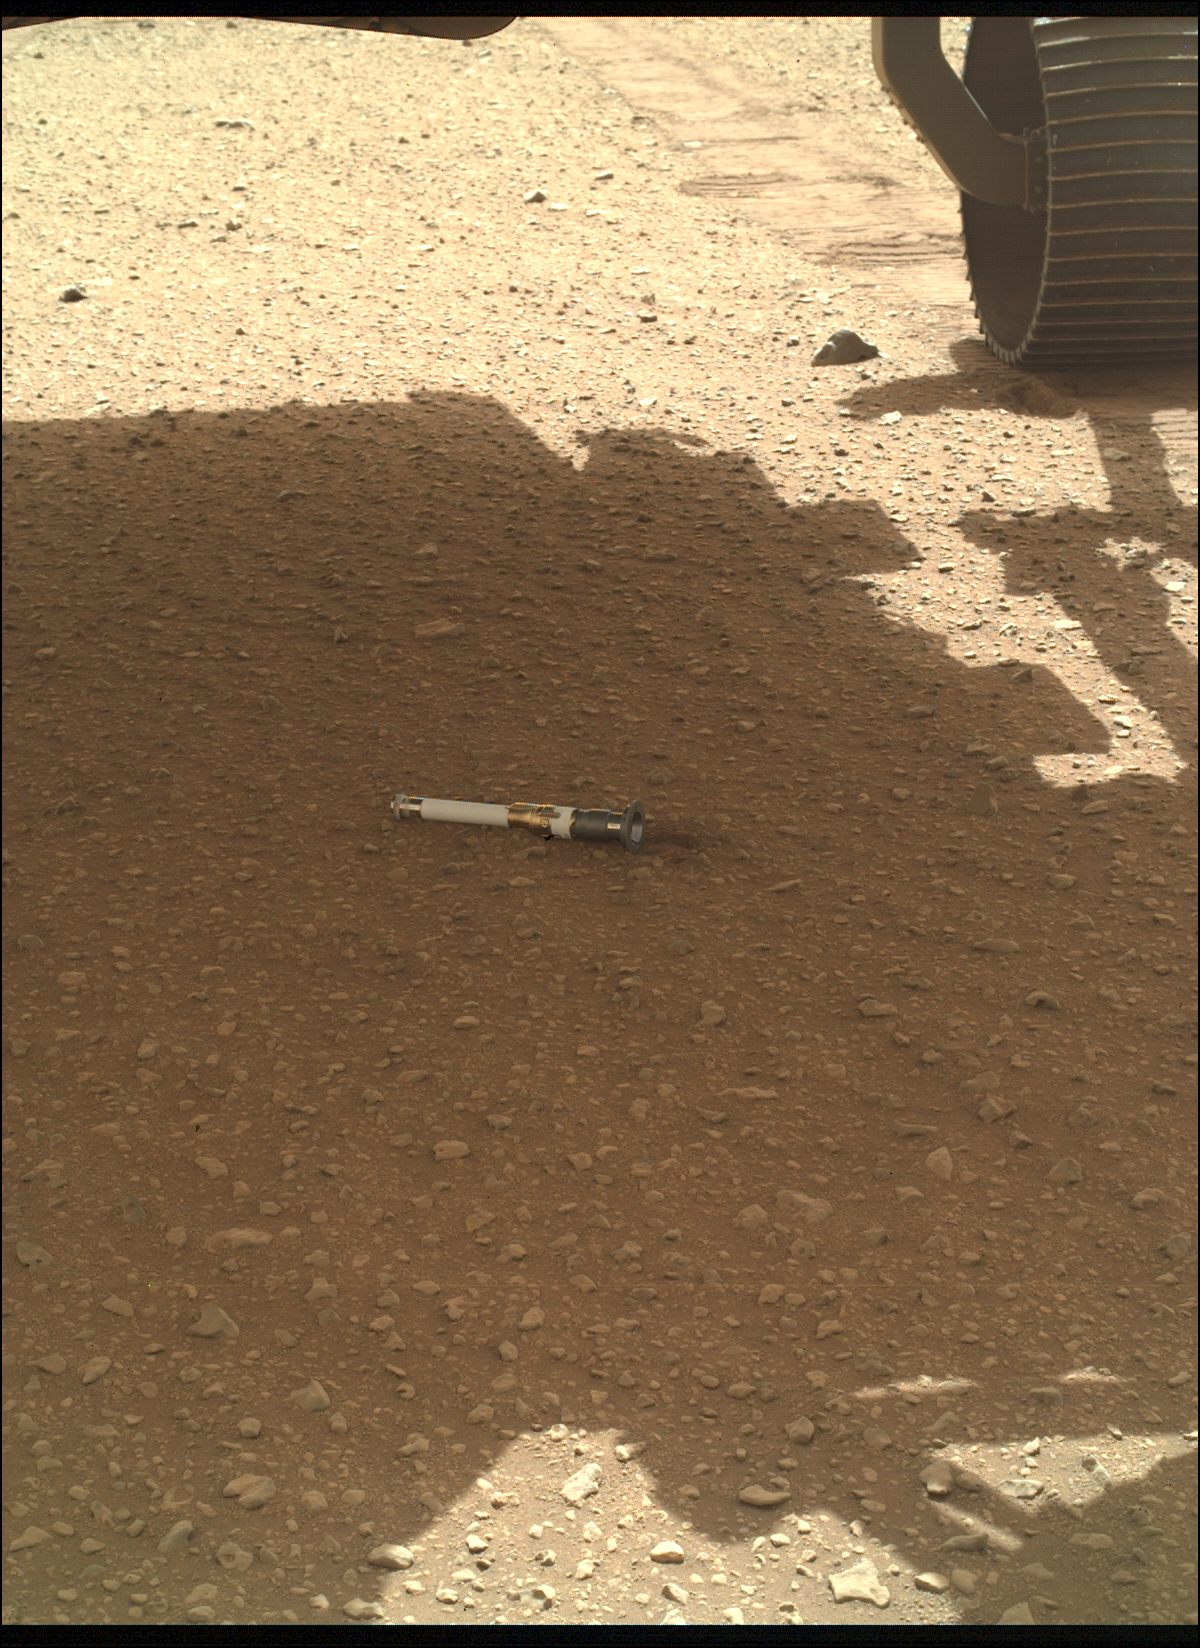 the sands of Mars with a tube on top.  the rover's wheels are just in plain sight